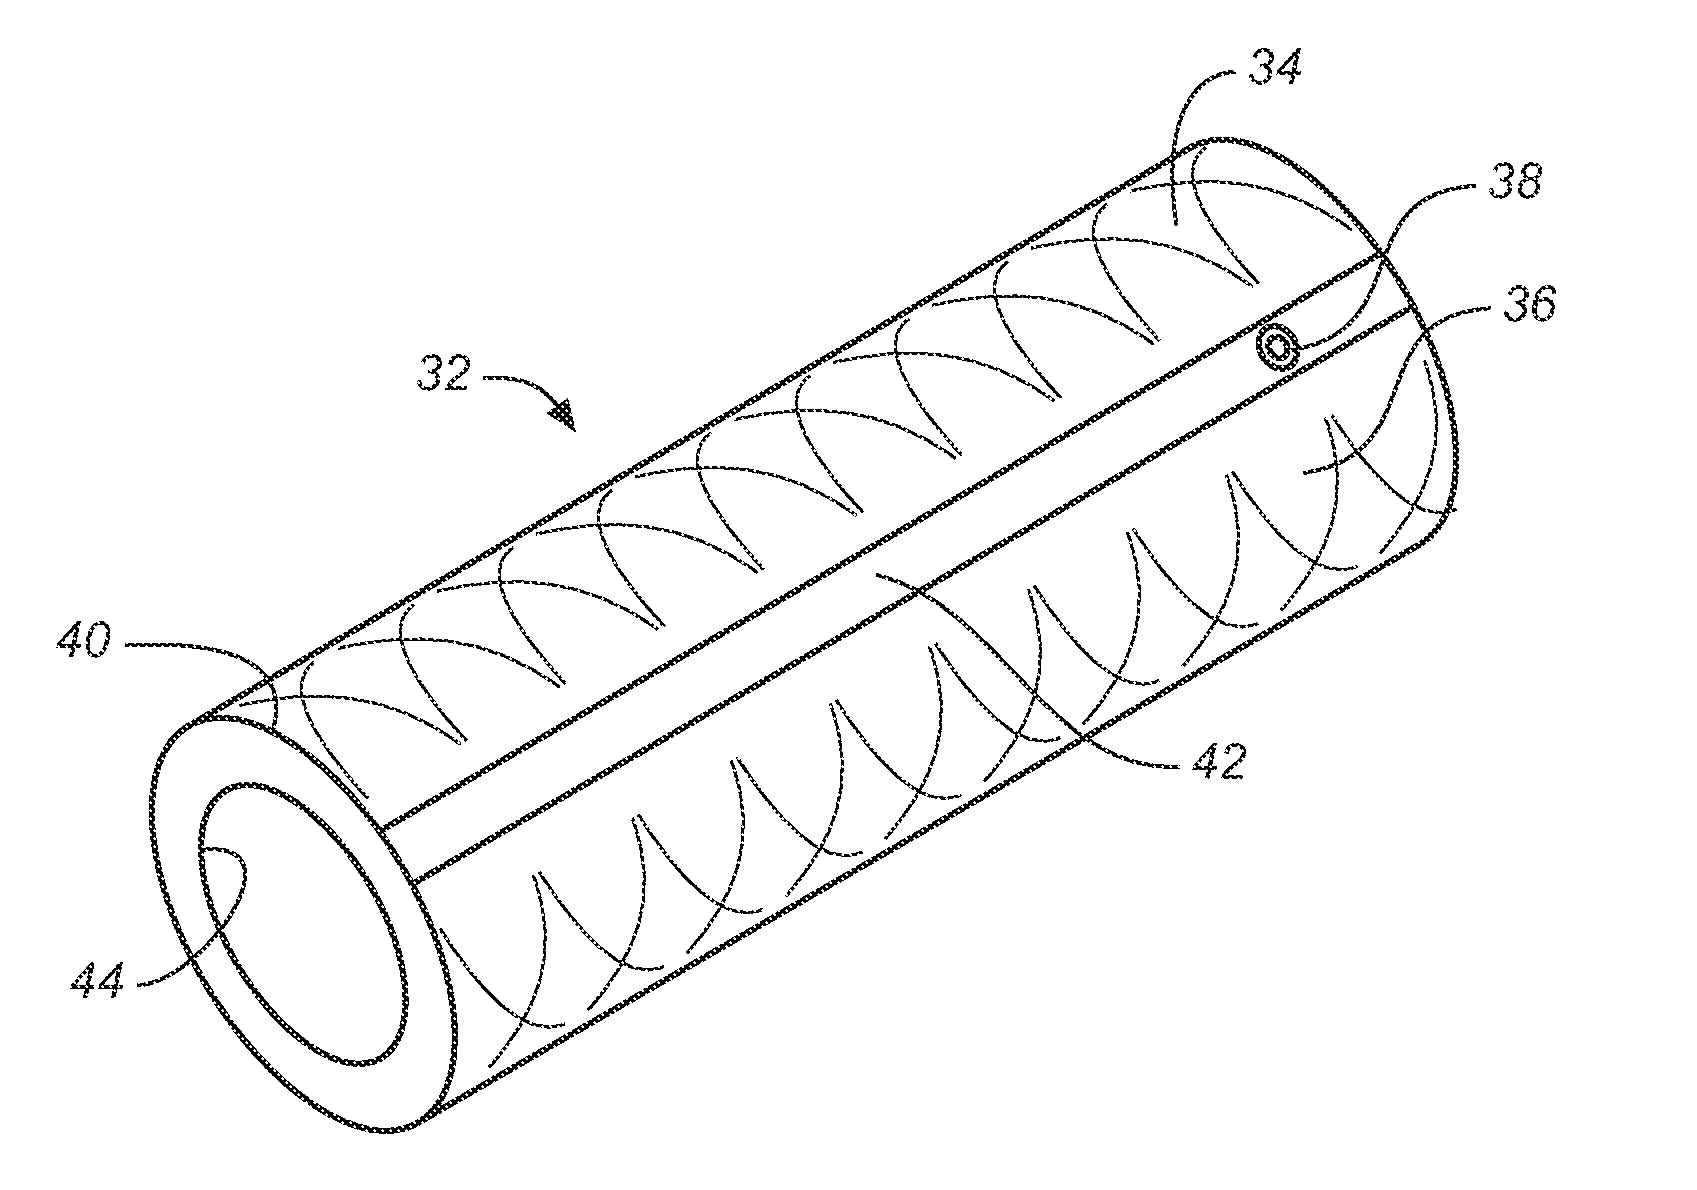 Electrochemical disinfection of implanted catheters